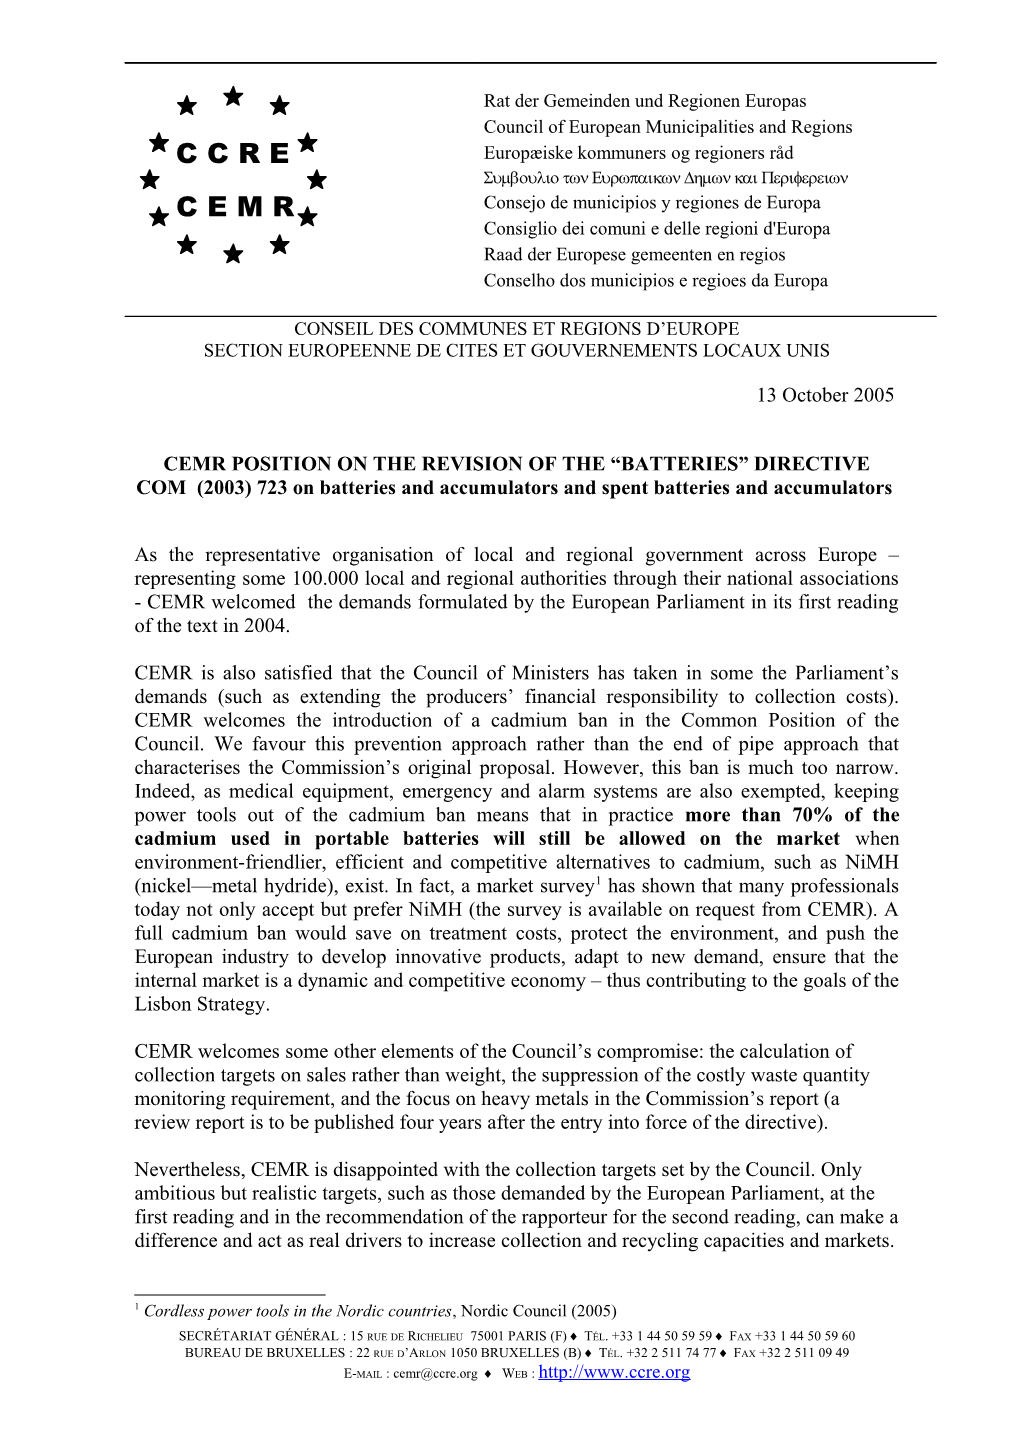 Cemr Position on the Revision of the Batteries Directive